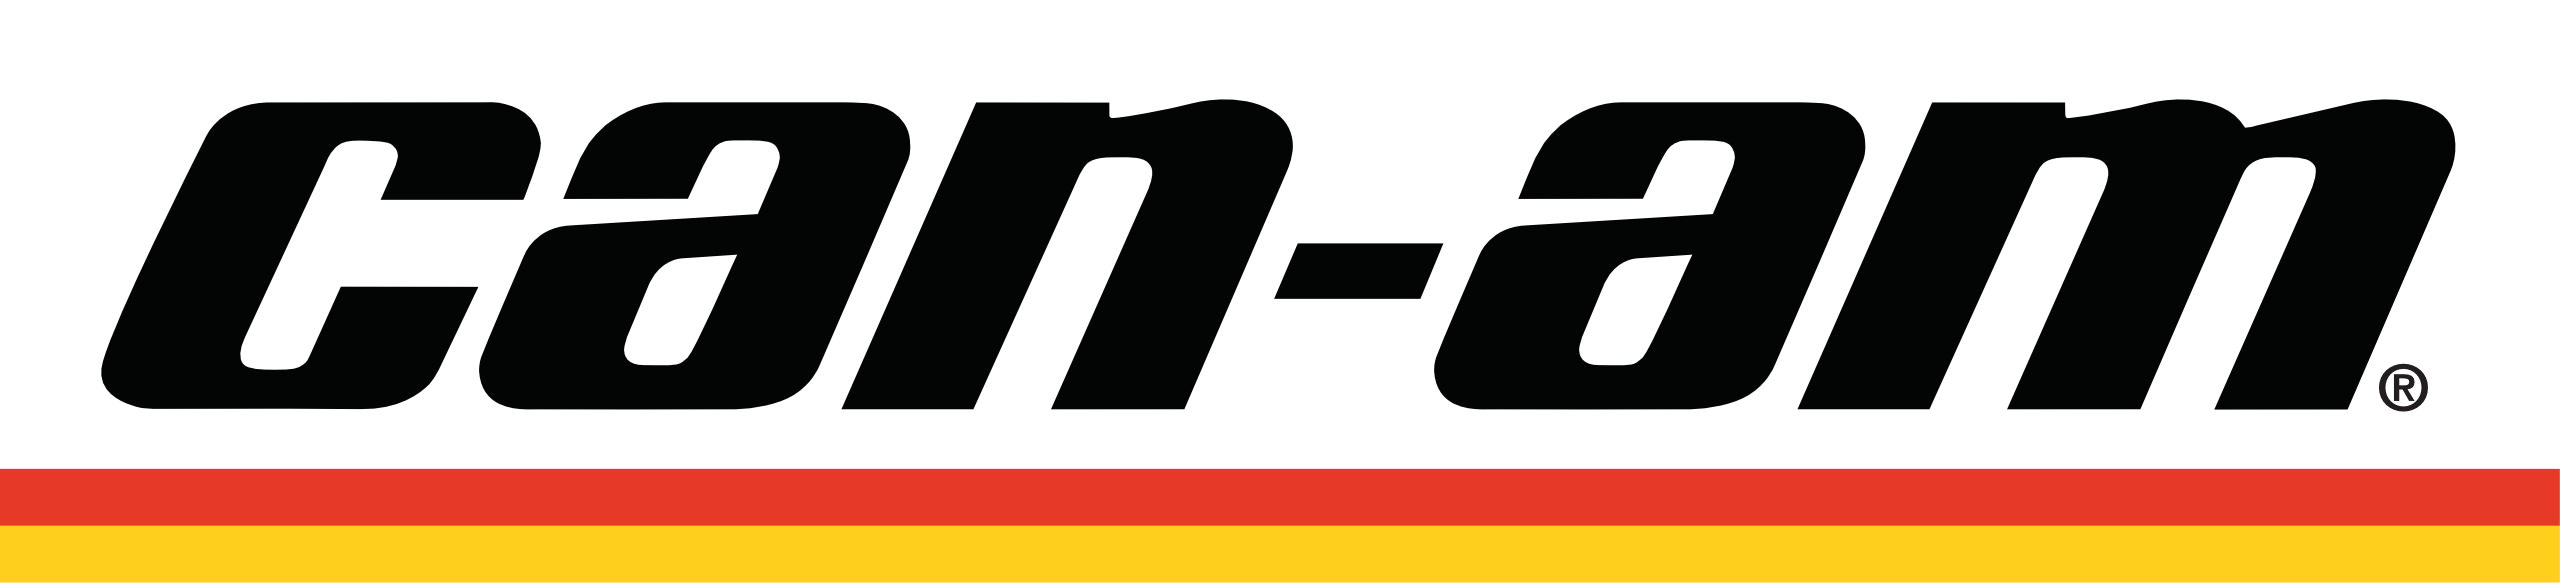 Can-Am - BRP (Bombardier Recreational Products Inc.) Logo.